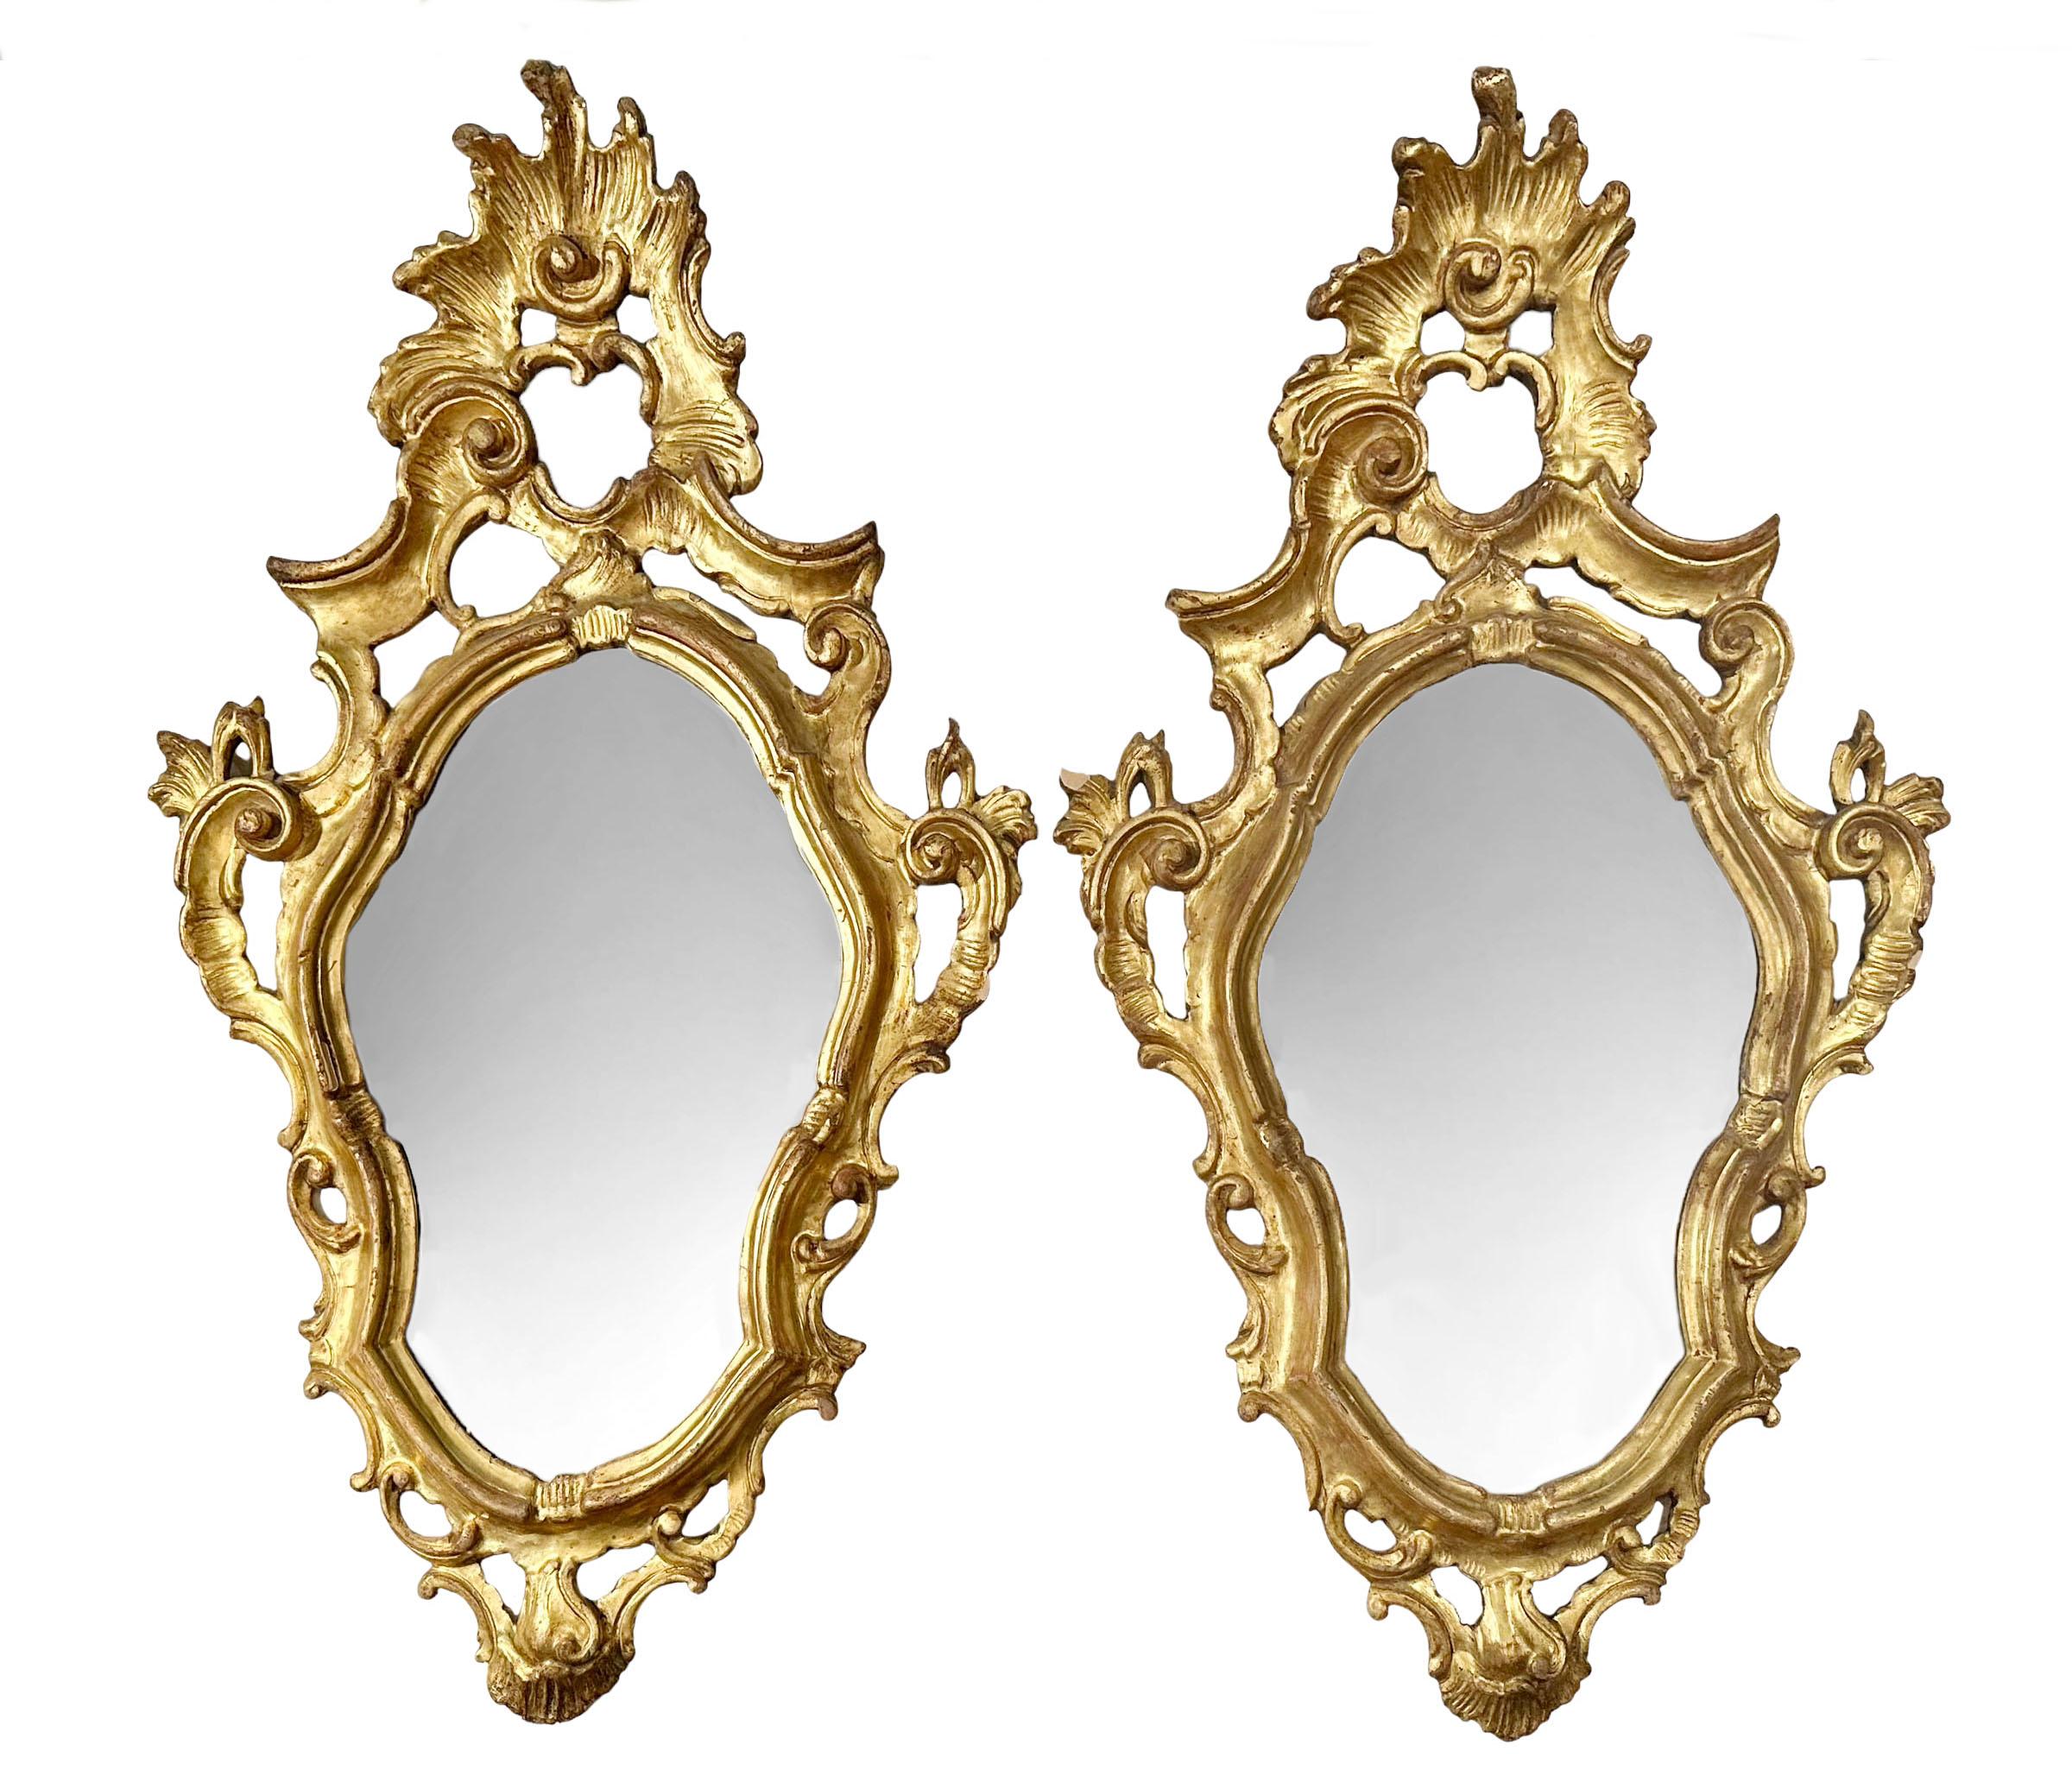 A pair of 19th century Italian mirrors in the rococo style with original glass. Gold gilded on carved wood, in amazing condition. 